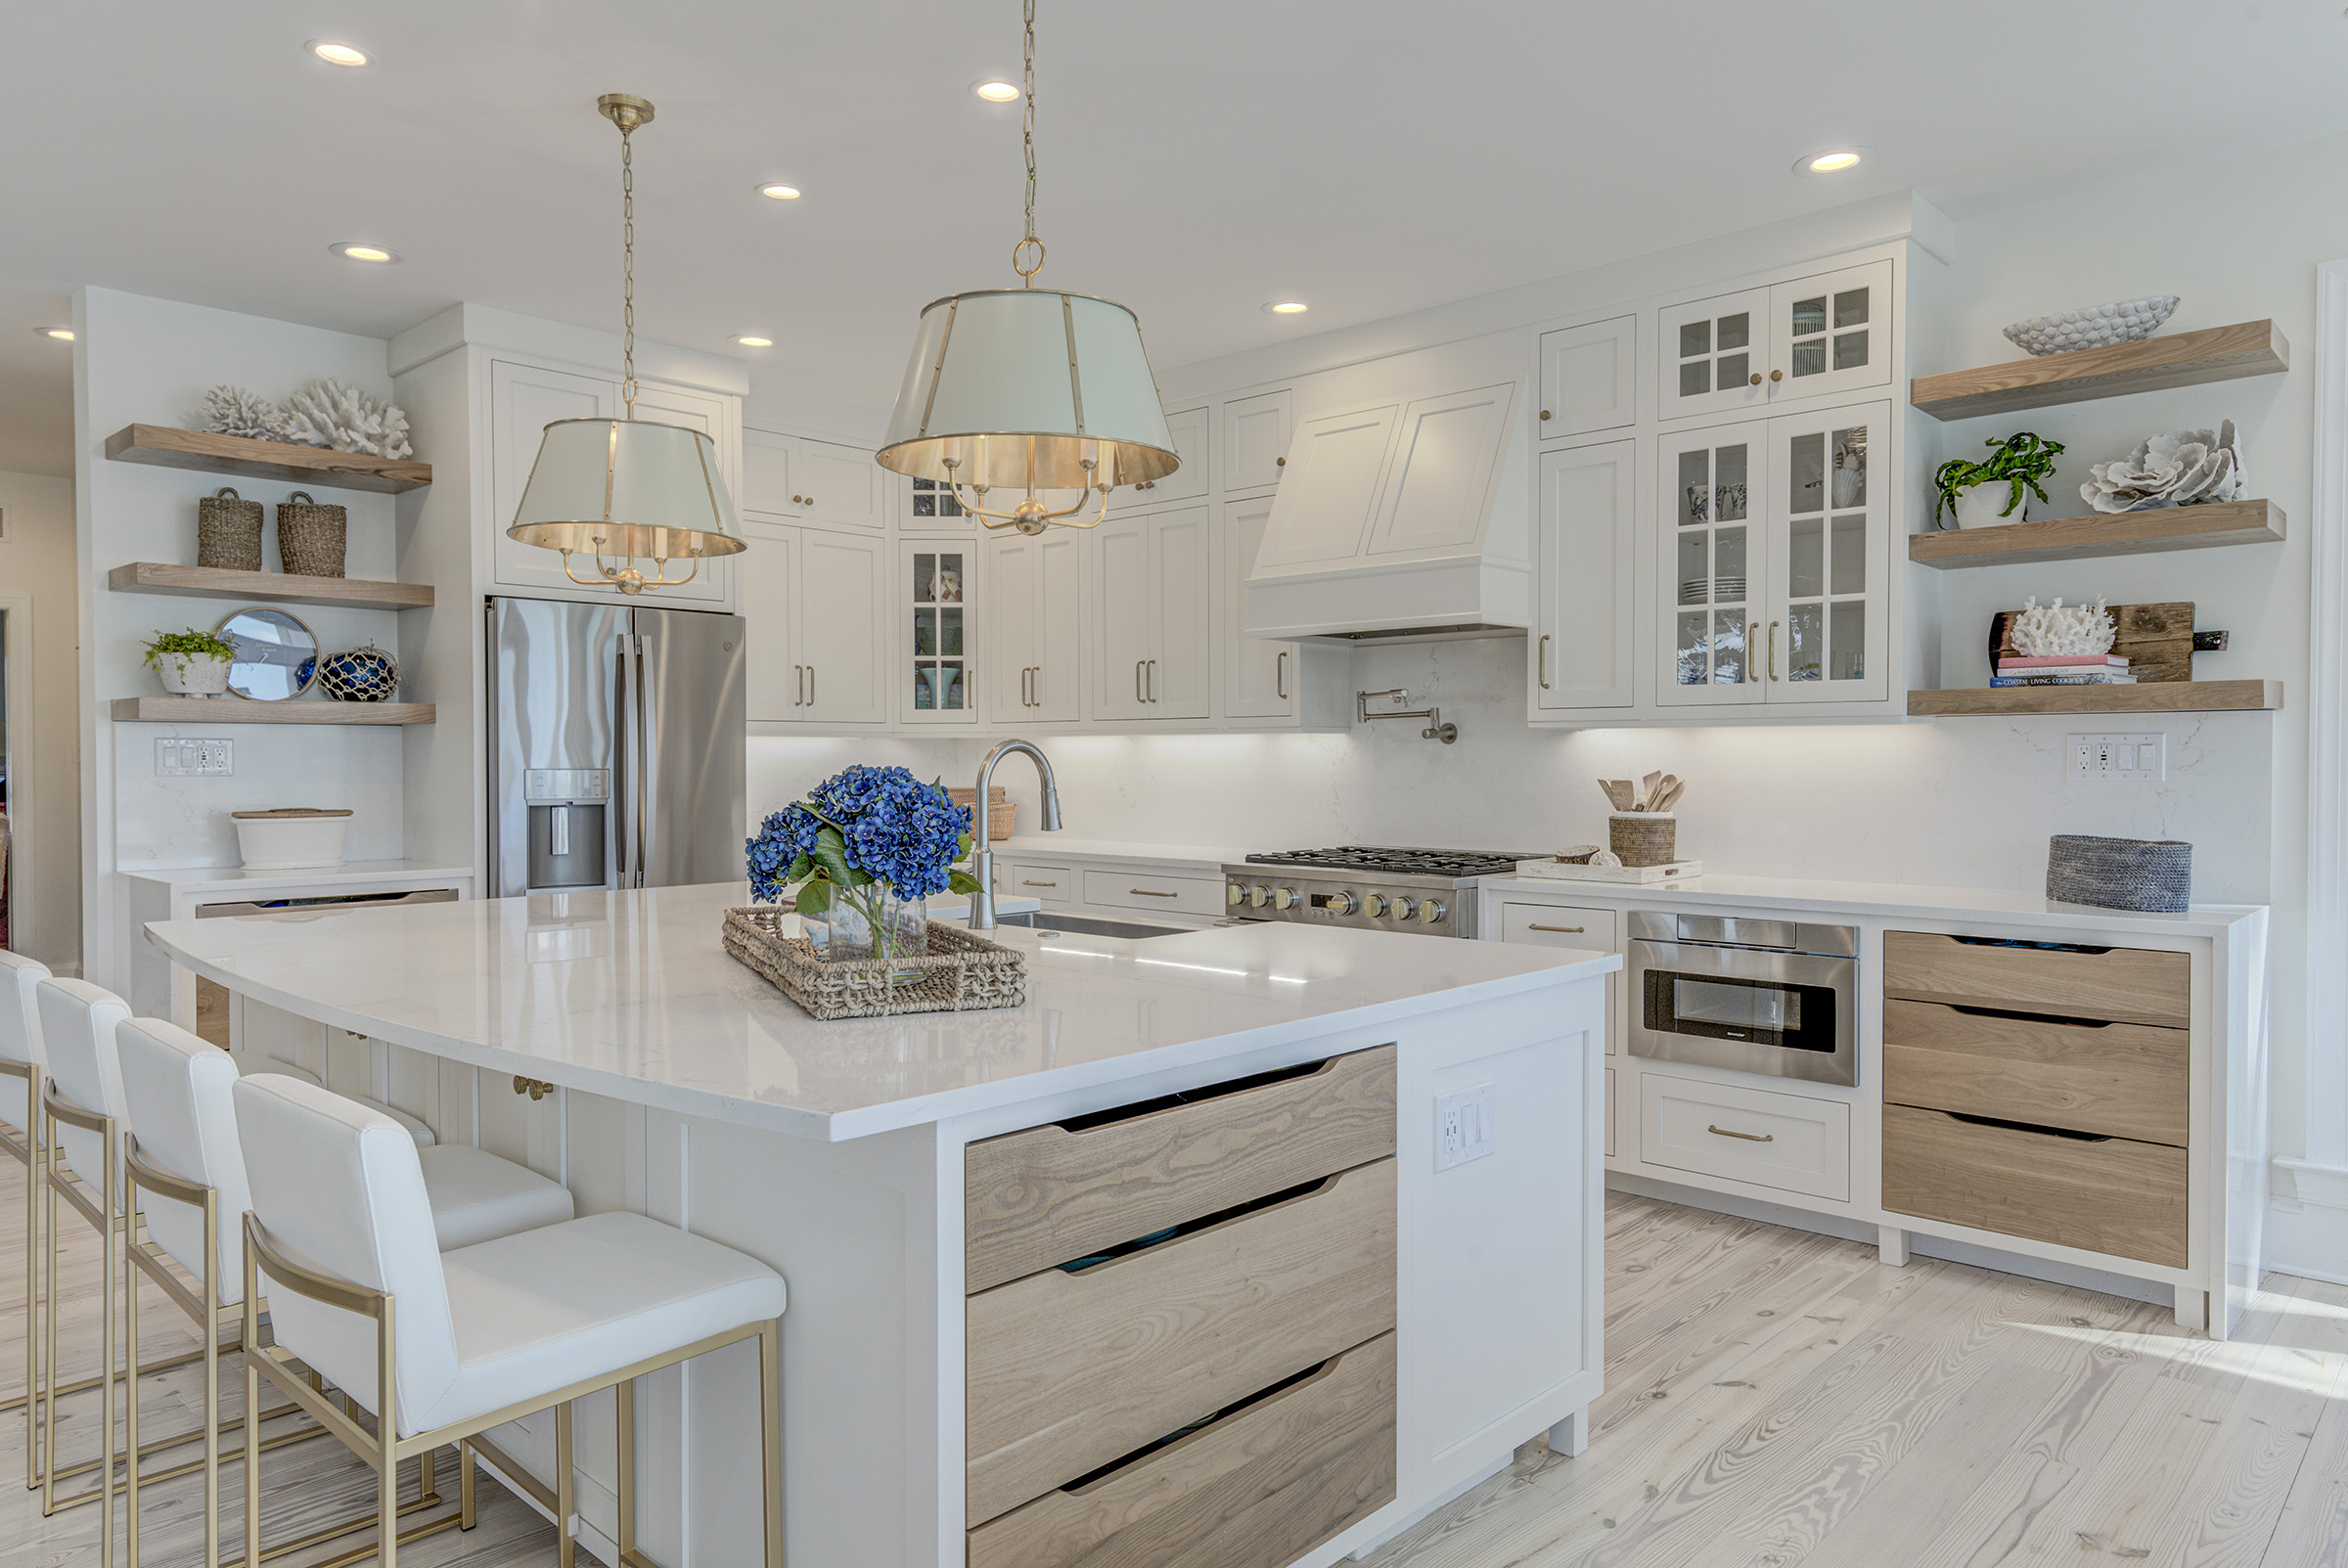 Sea Light Design-Build Pine Road Kitchen Renovation in Selbyville Delaware - new state of the art appliances